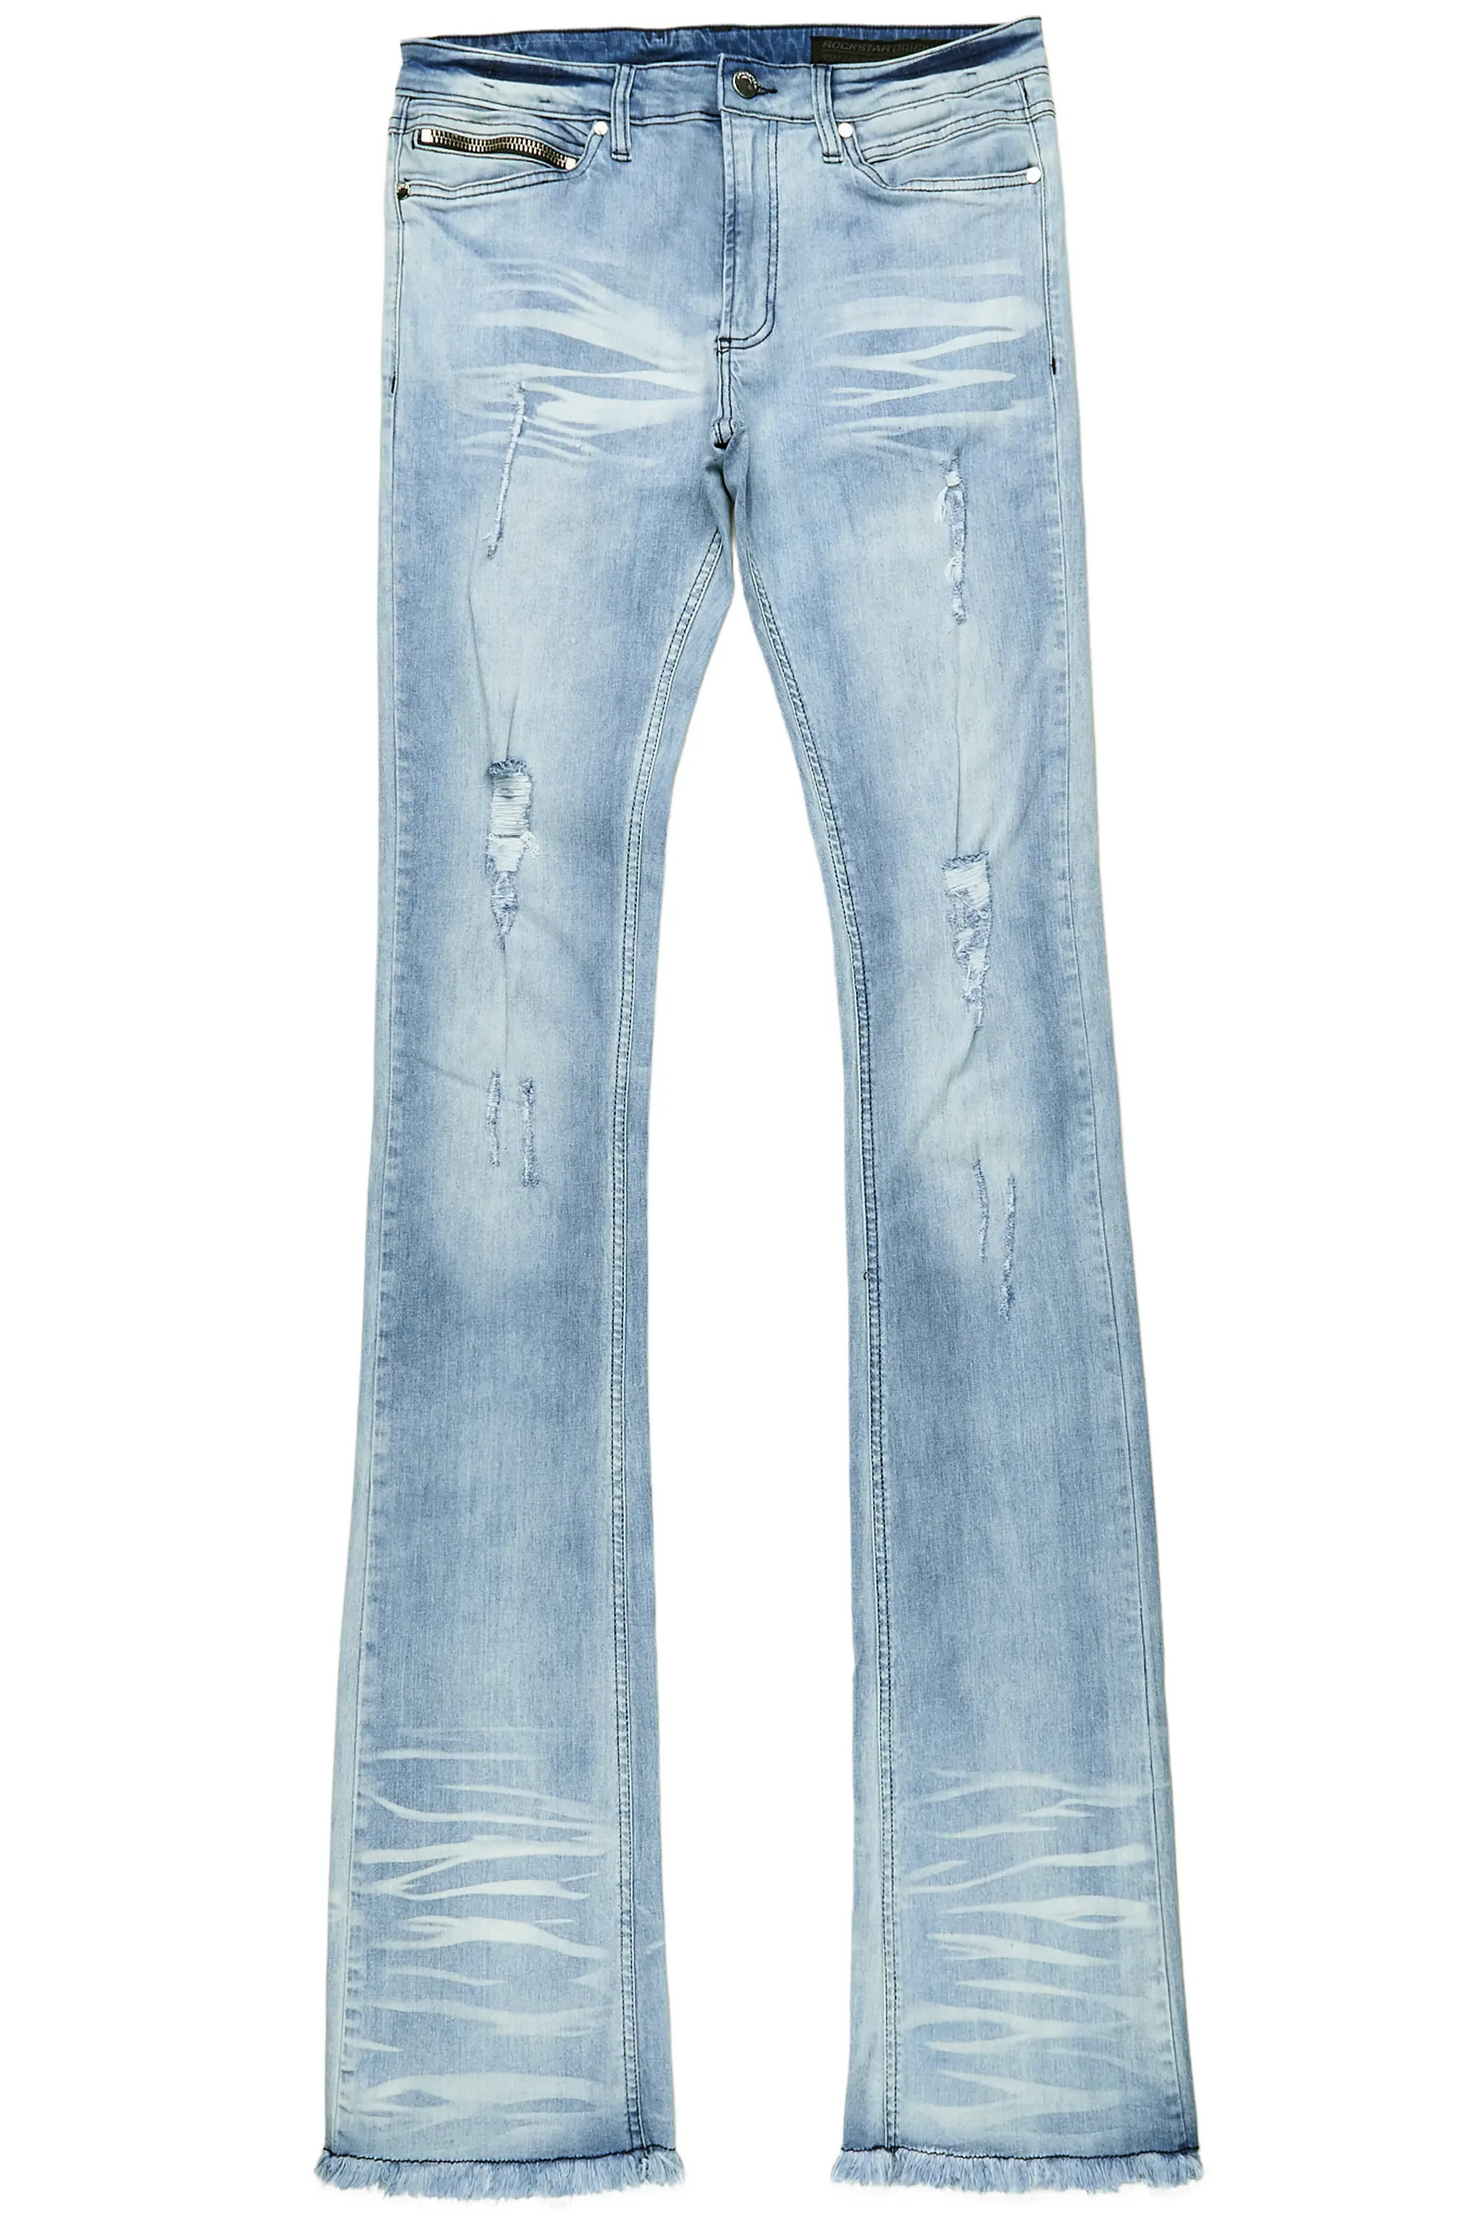 Faby Light Blue Super Stacked Flare Jean